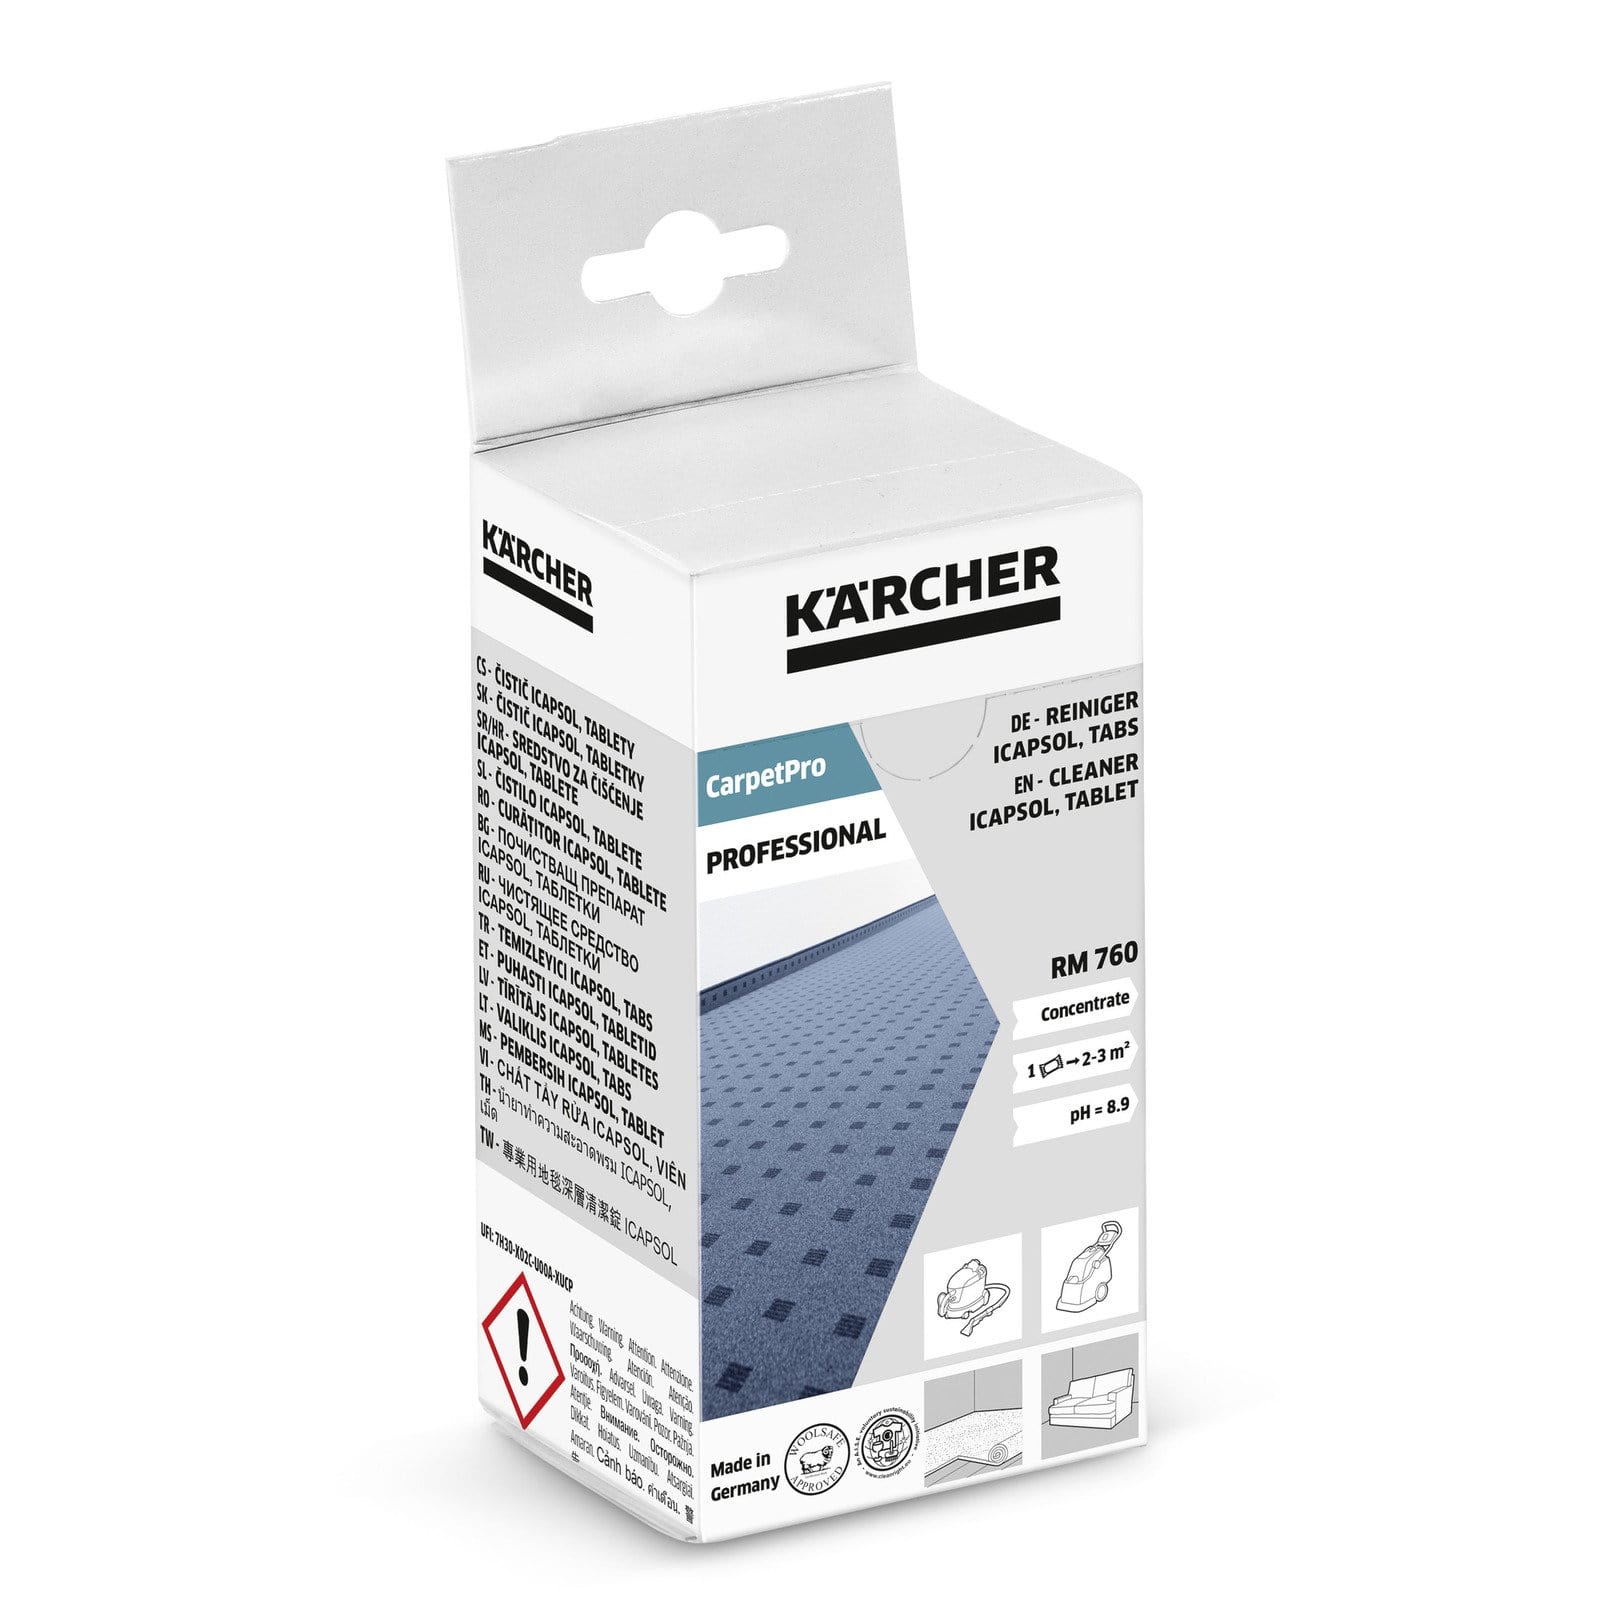 Karcher CarpetPro Cleaner iCapsol RM 760 Tablet, 16Tablets | Supply Master | Accra, Ghana Tools Building Steel Engineering Hardware tool